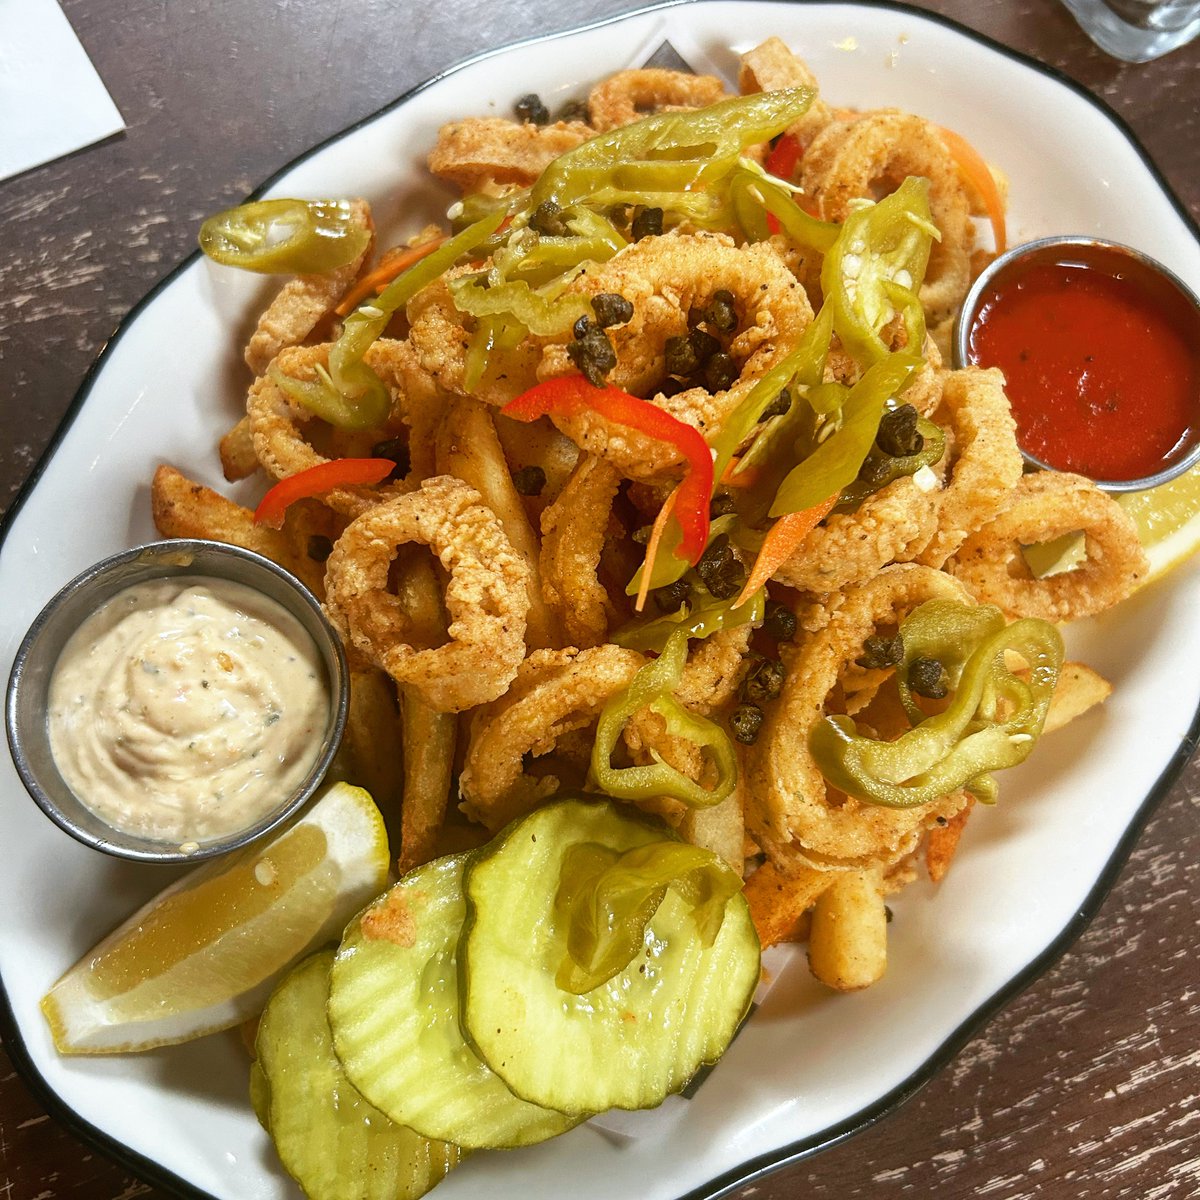 👨🏽‍🍳 Chef’s special tonight: 𝐂𝐫𝐢𝐬𝐩𝐲 𝐂𝐚𝐥𝐚𝐦𝐚𝐫𝐢 buttermilk fried calamari, old bay fries, italian long hot peppers, crispy capers, dill pickles, house-made marinara & remoulade #urbansaloon